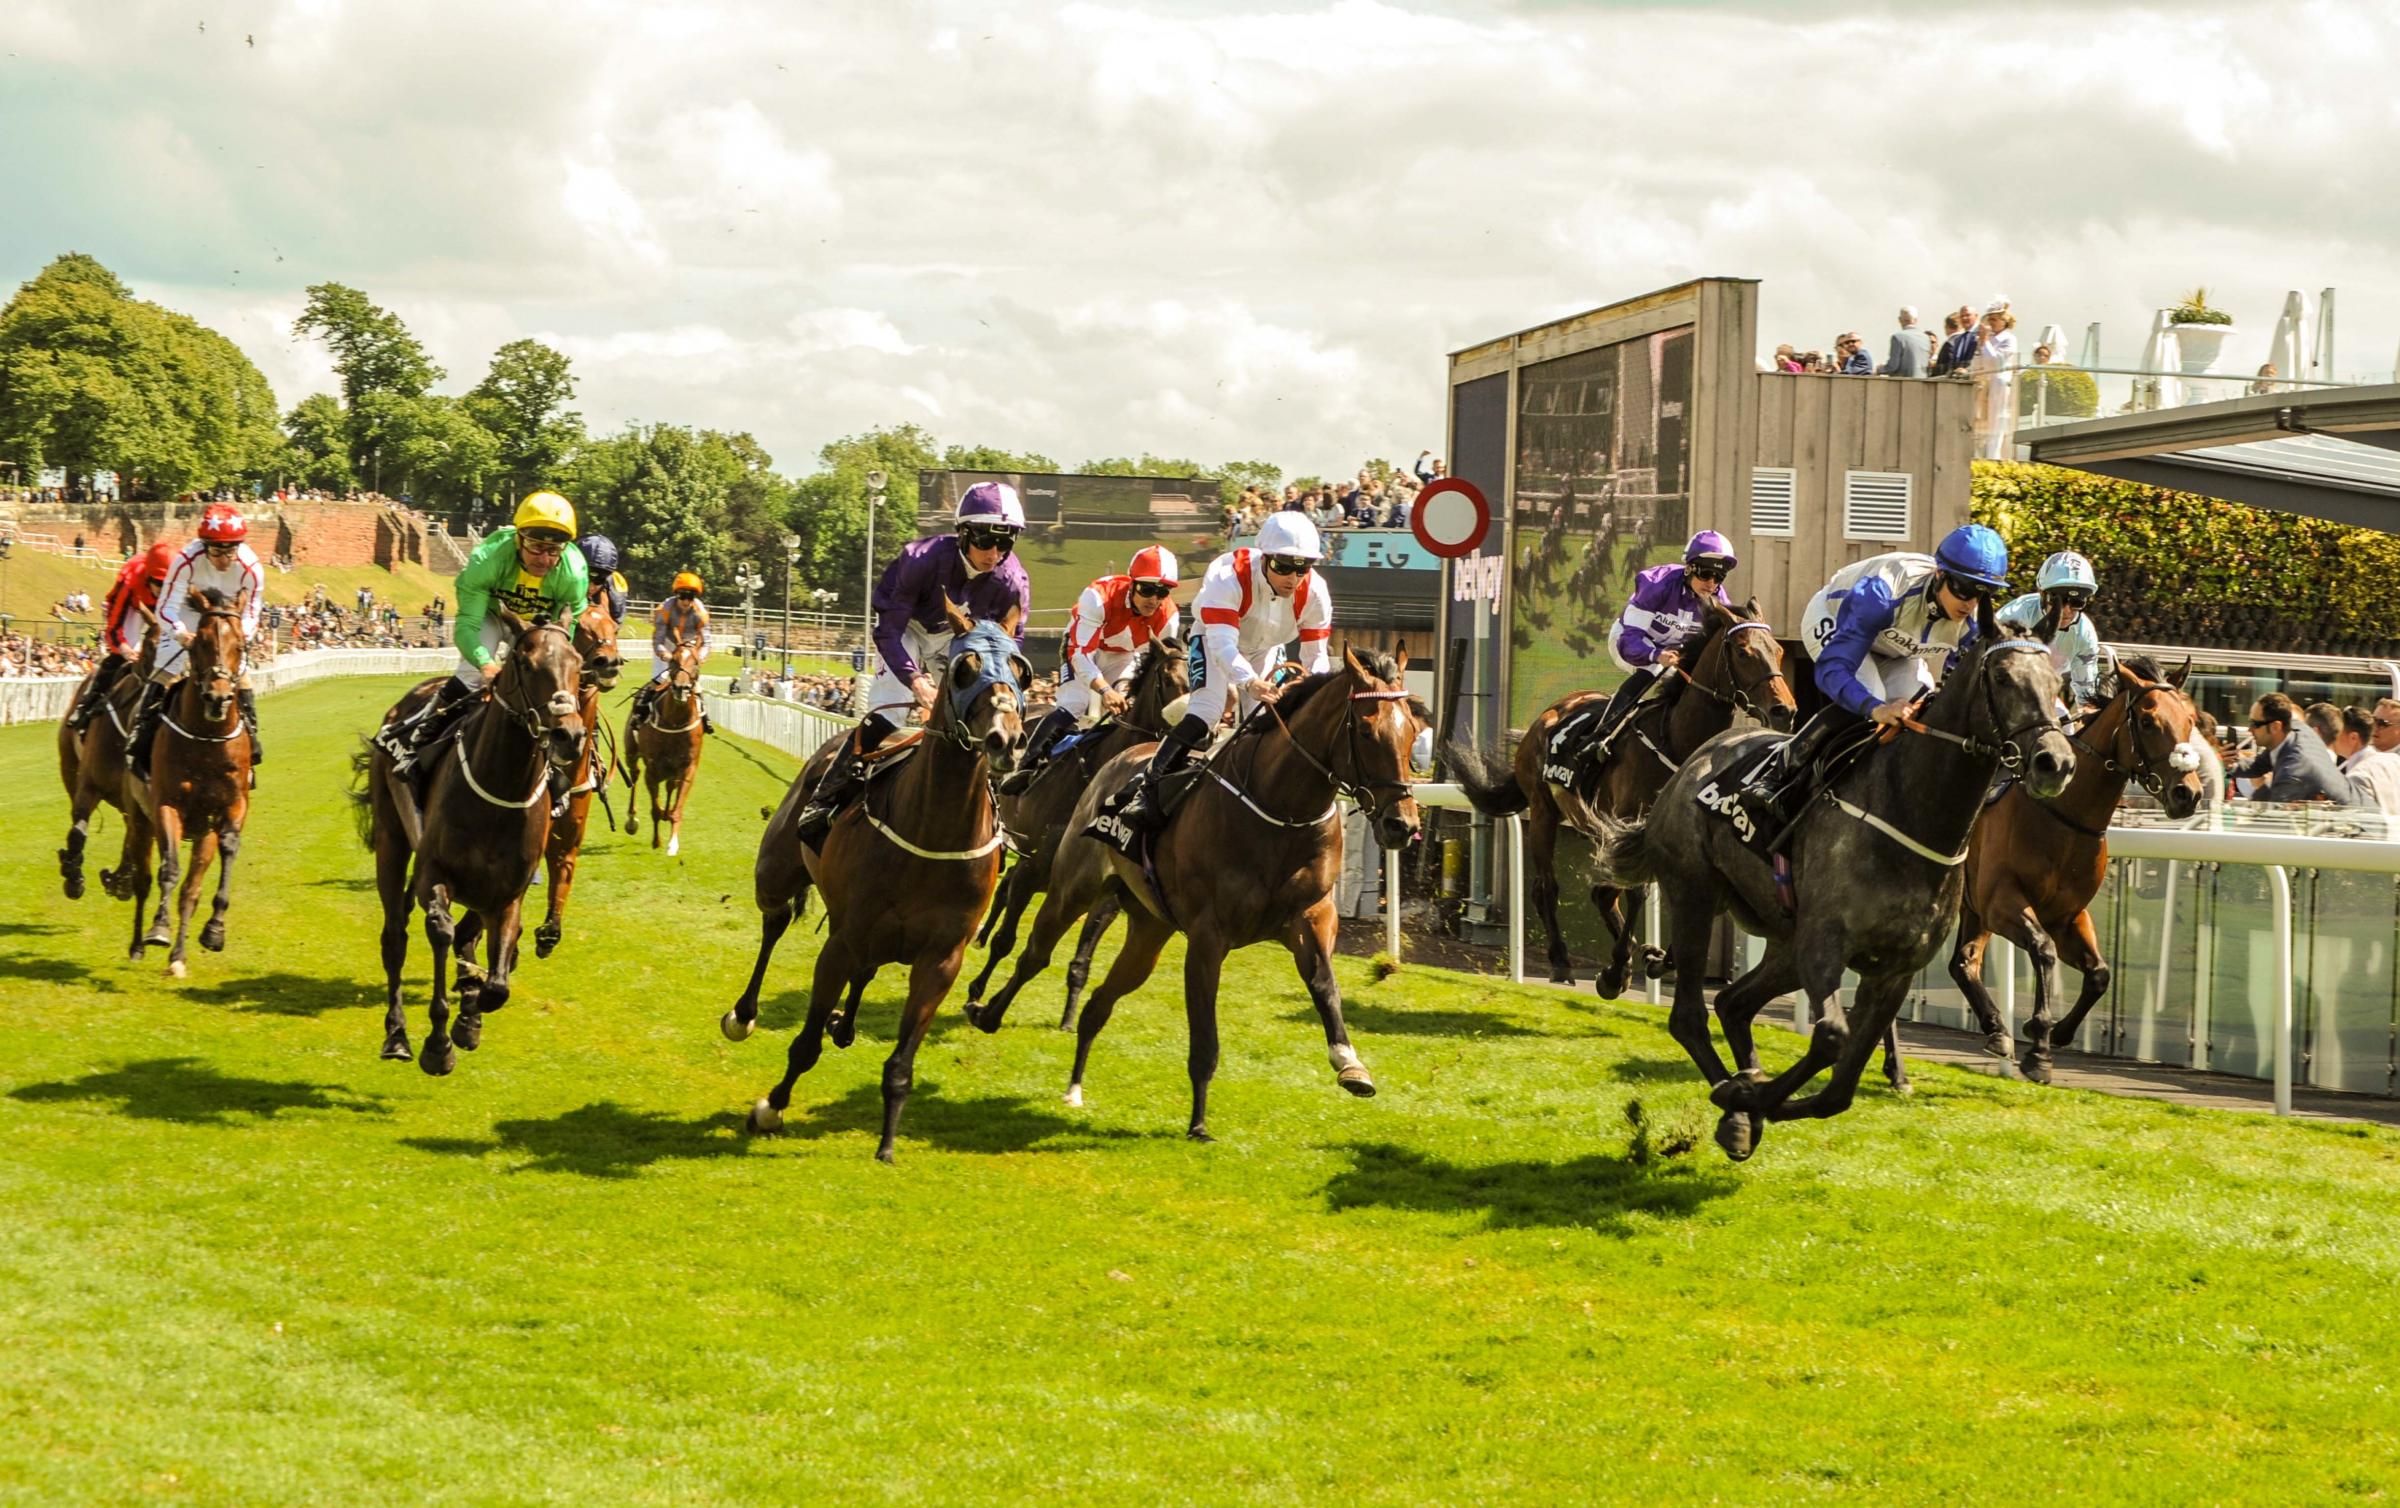 Chester Racecourse, Edinburgh Gin Summer Saturday. Picture Fourth race of the day, The Extra Places Every Day At Betway Handicap Stakes (Class 2) winner No 1 Outgate and jockey Richard Kingscote, second place No 11 Thunder Legend. All pictures: Simon